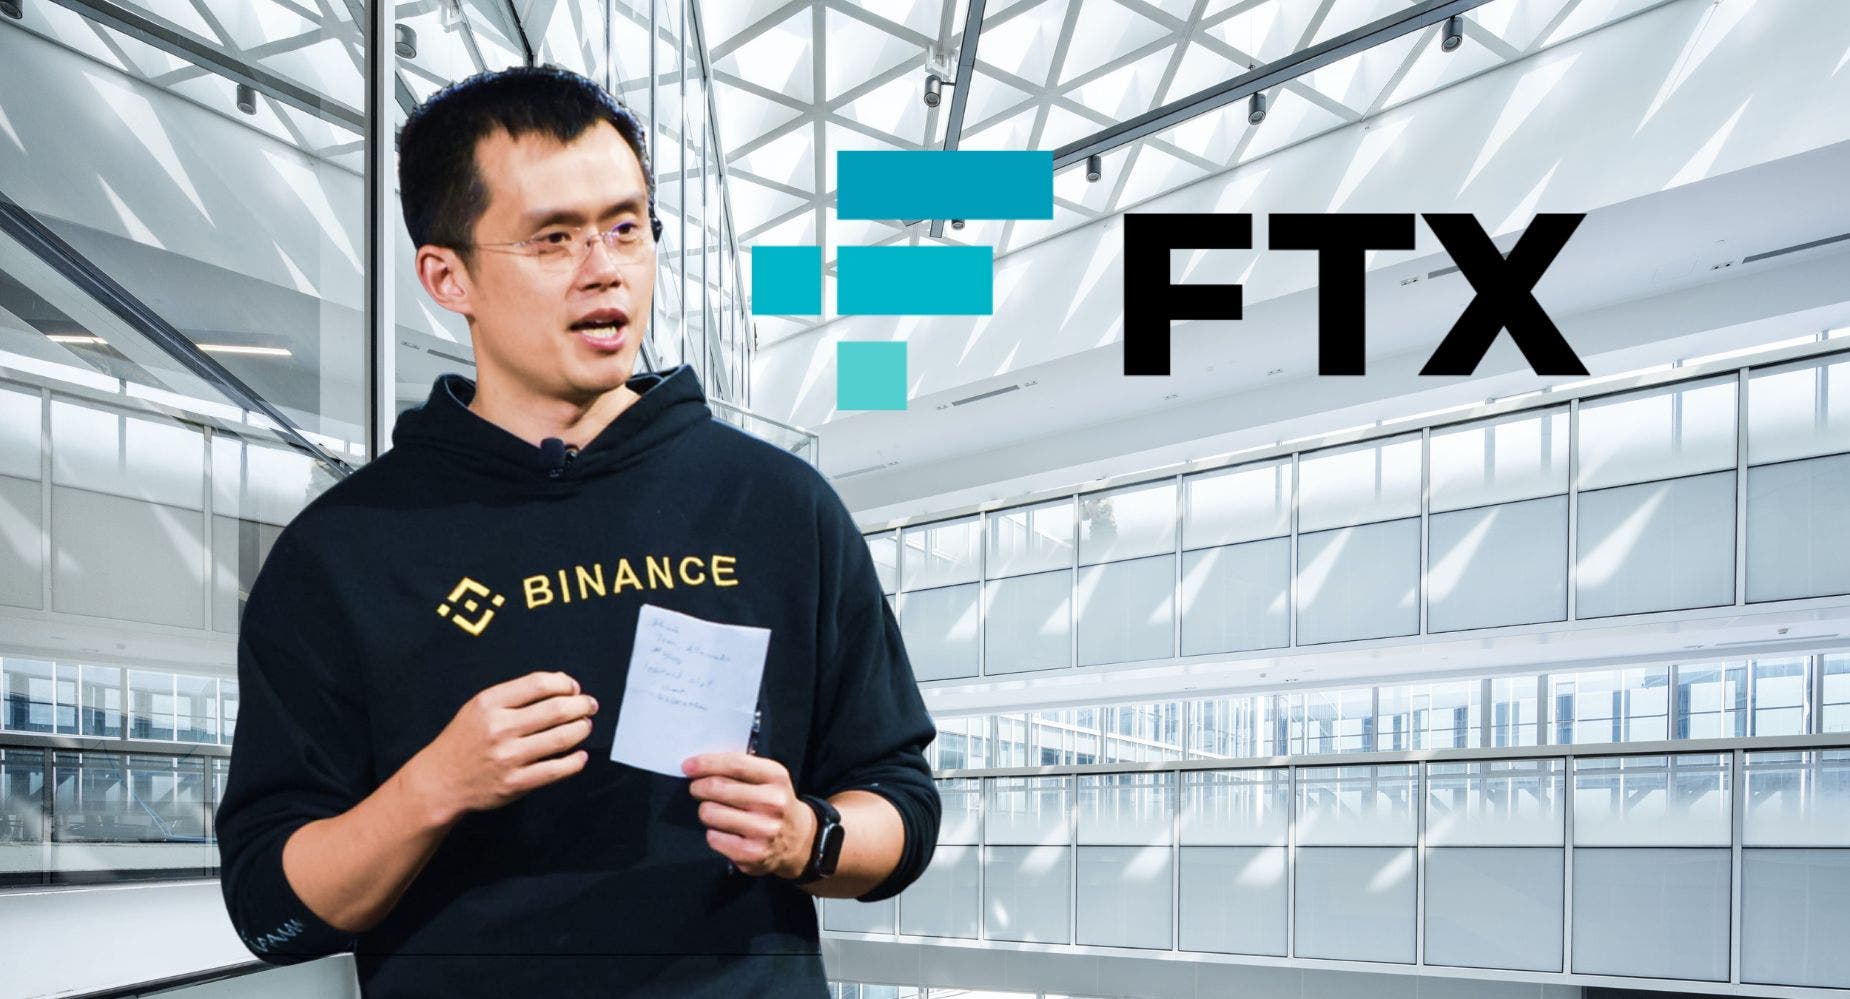 'They Just Couldn't Have So Much Cash': Binance CEO On His FTX 'Hunches' And Importance Of Stablecoins In Bear Market